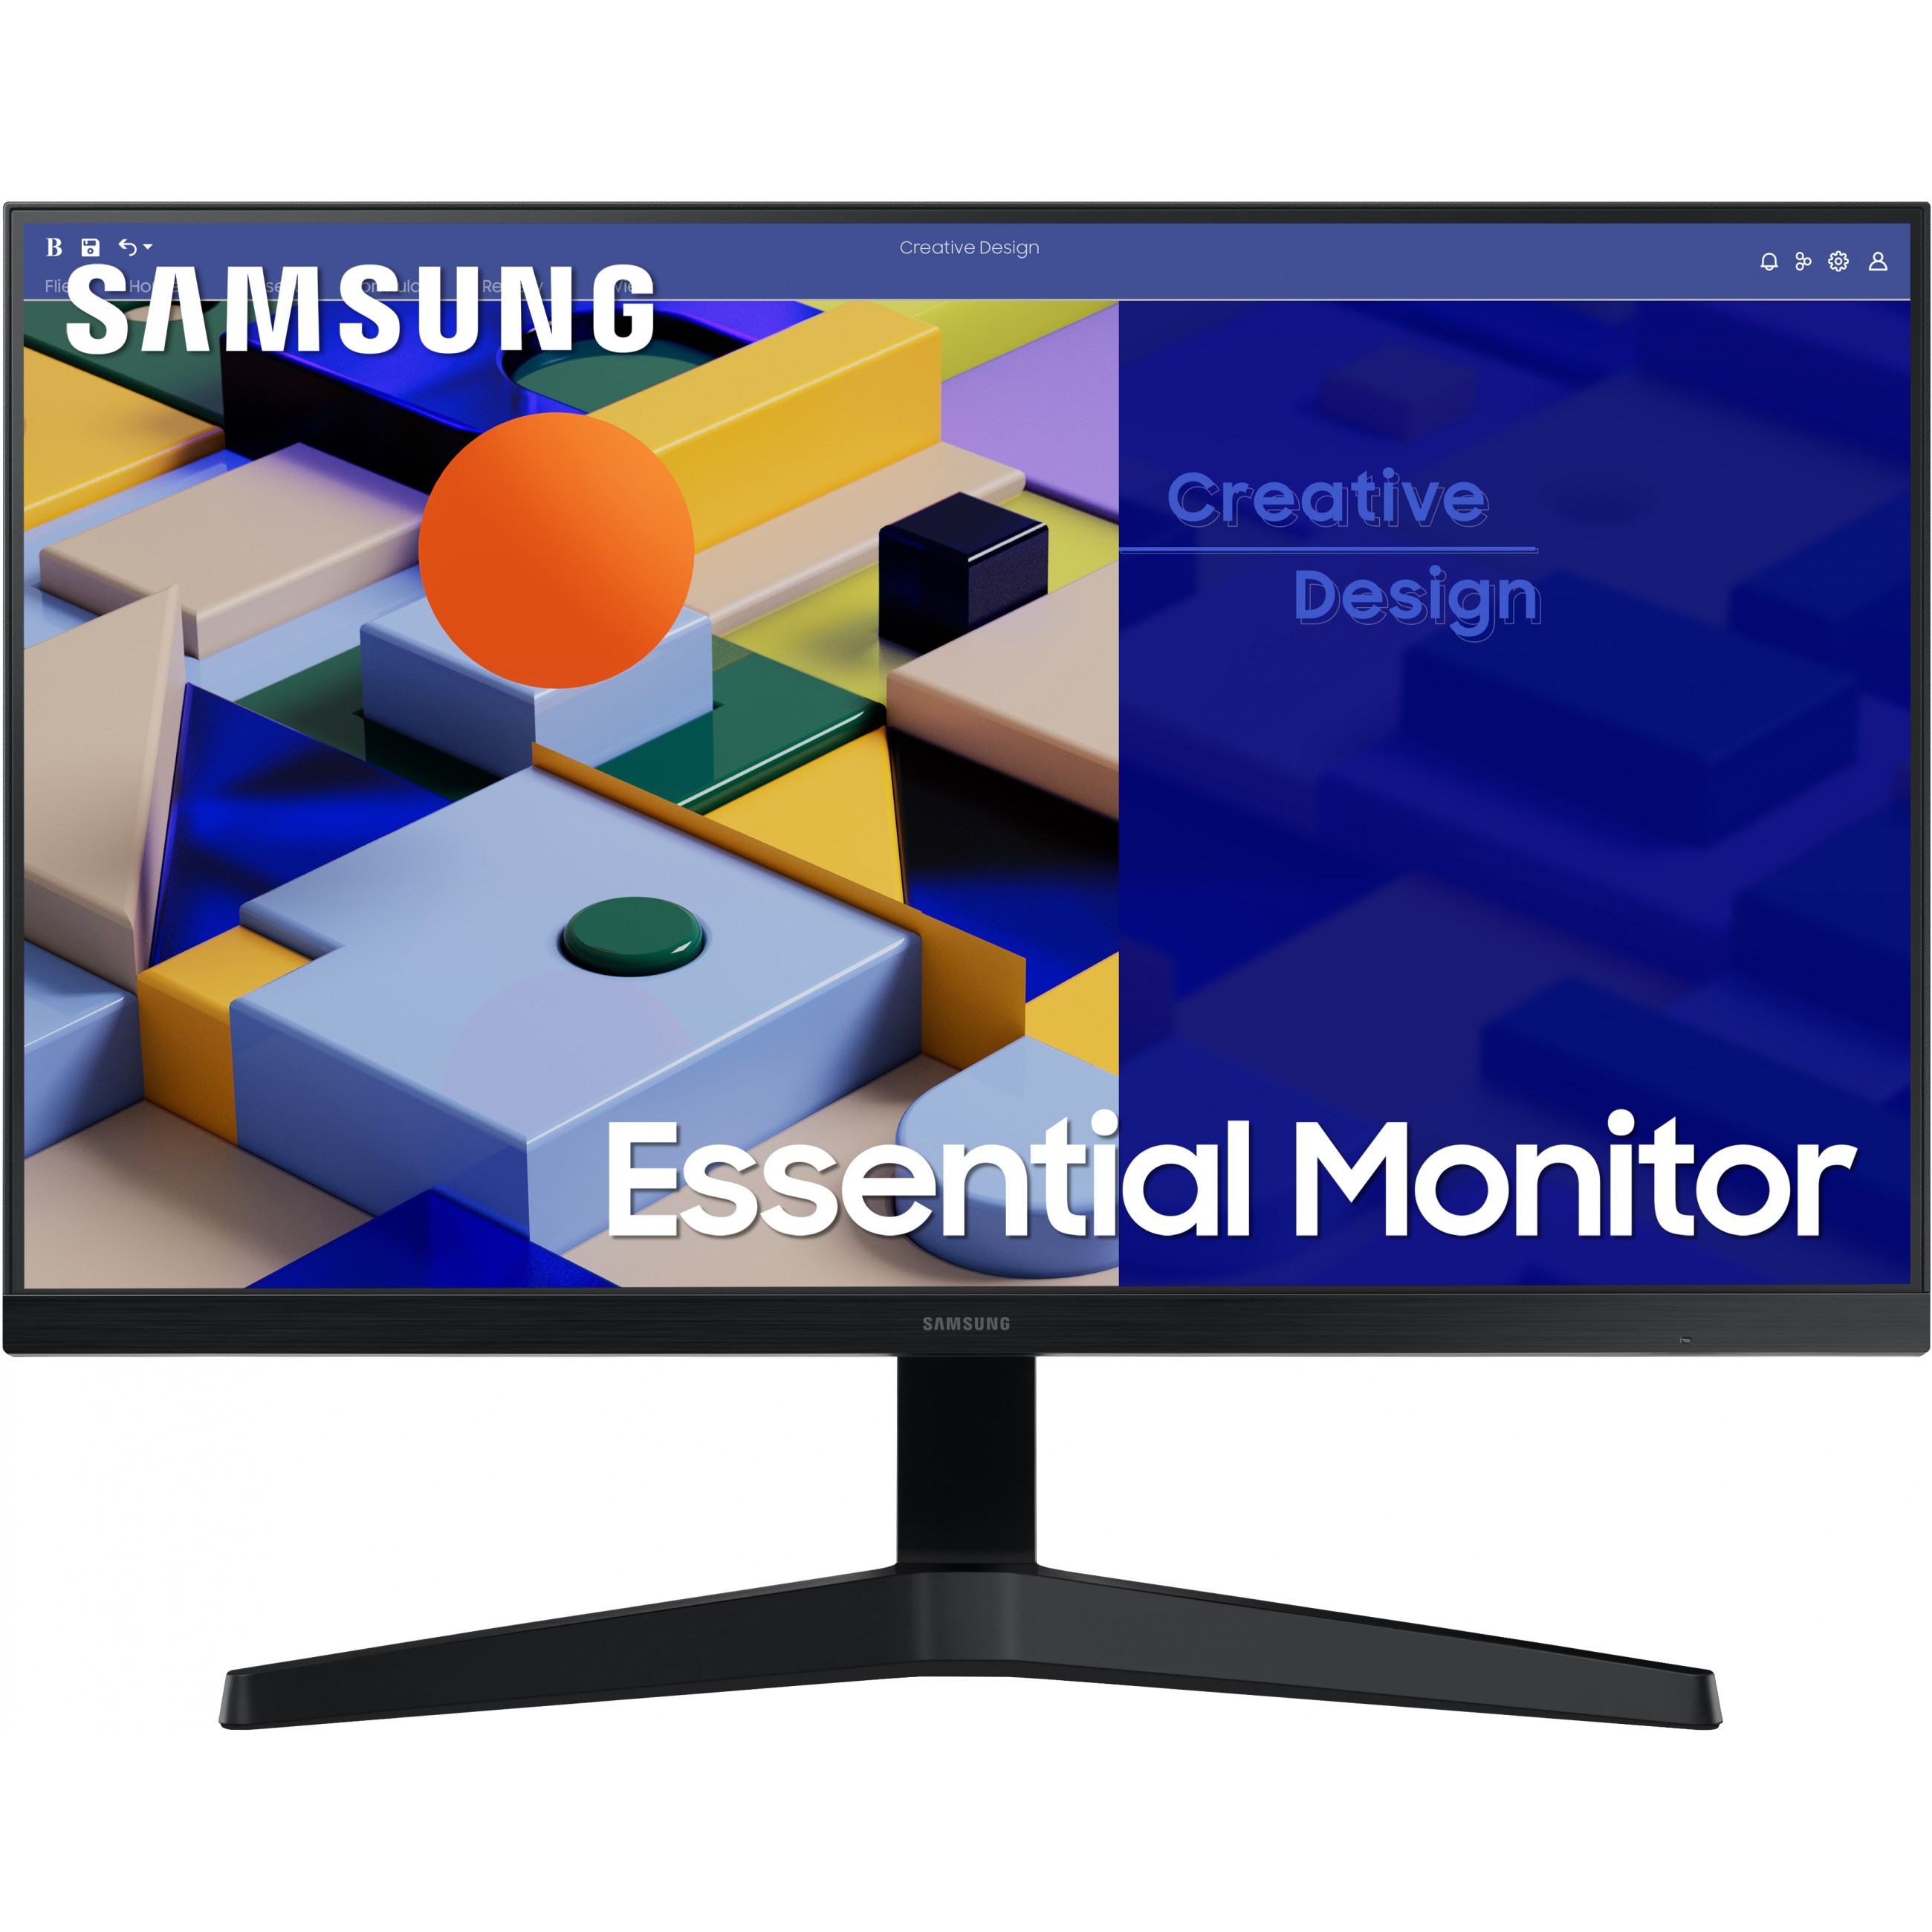 Samsung Essential Monitor S3 S31C LED display